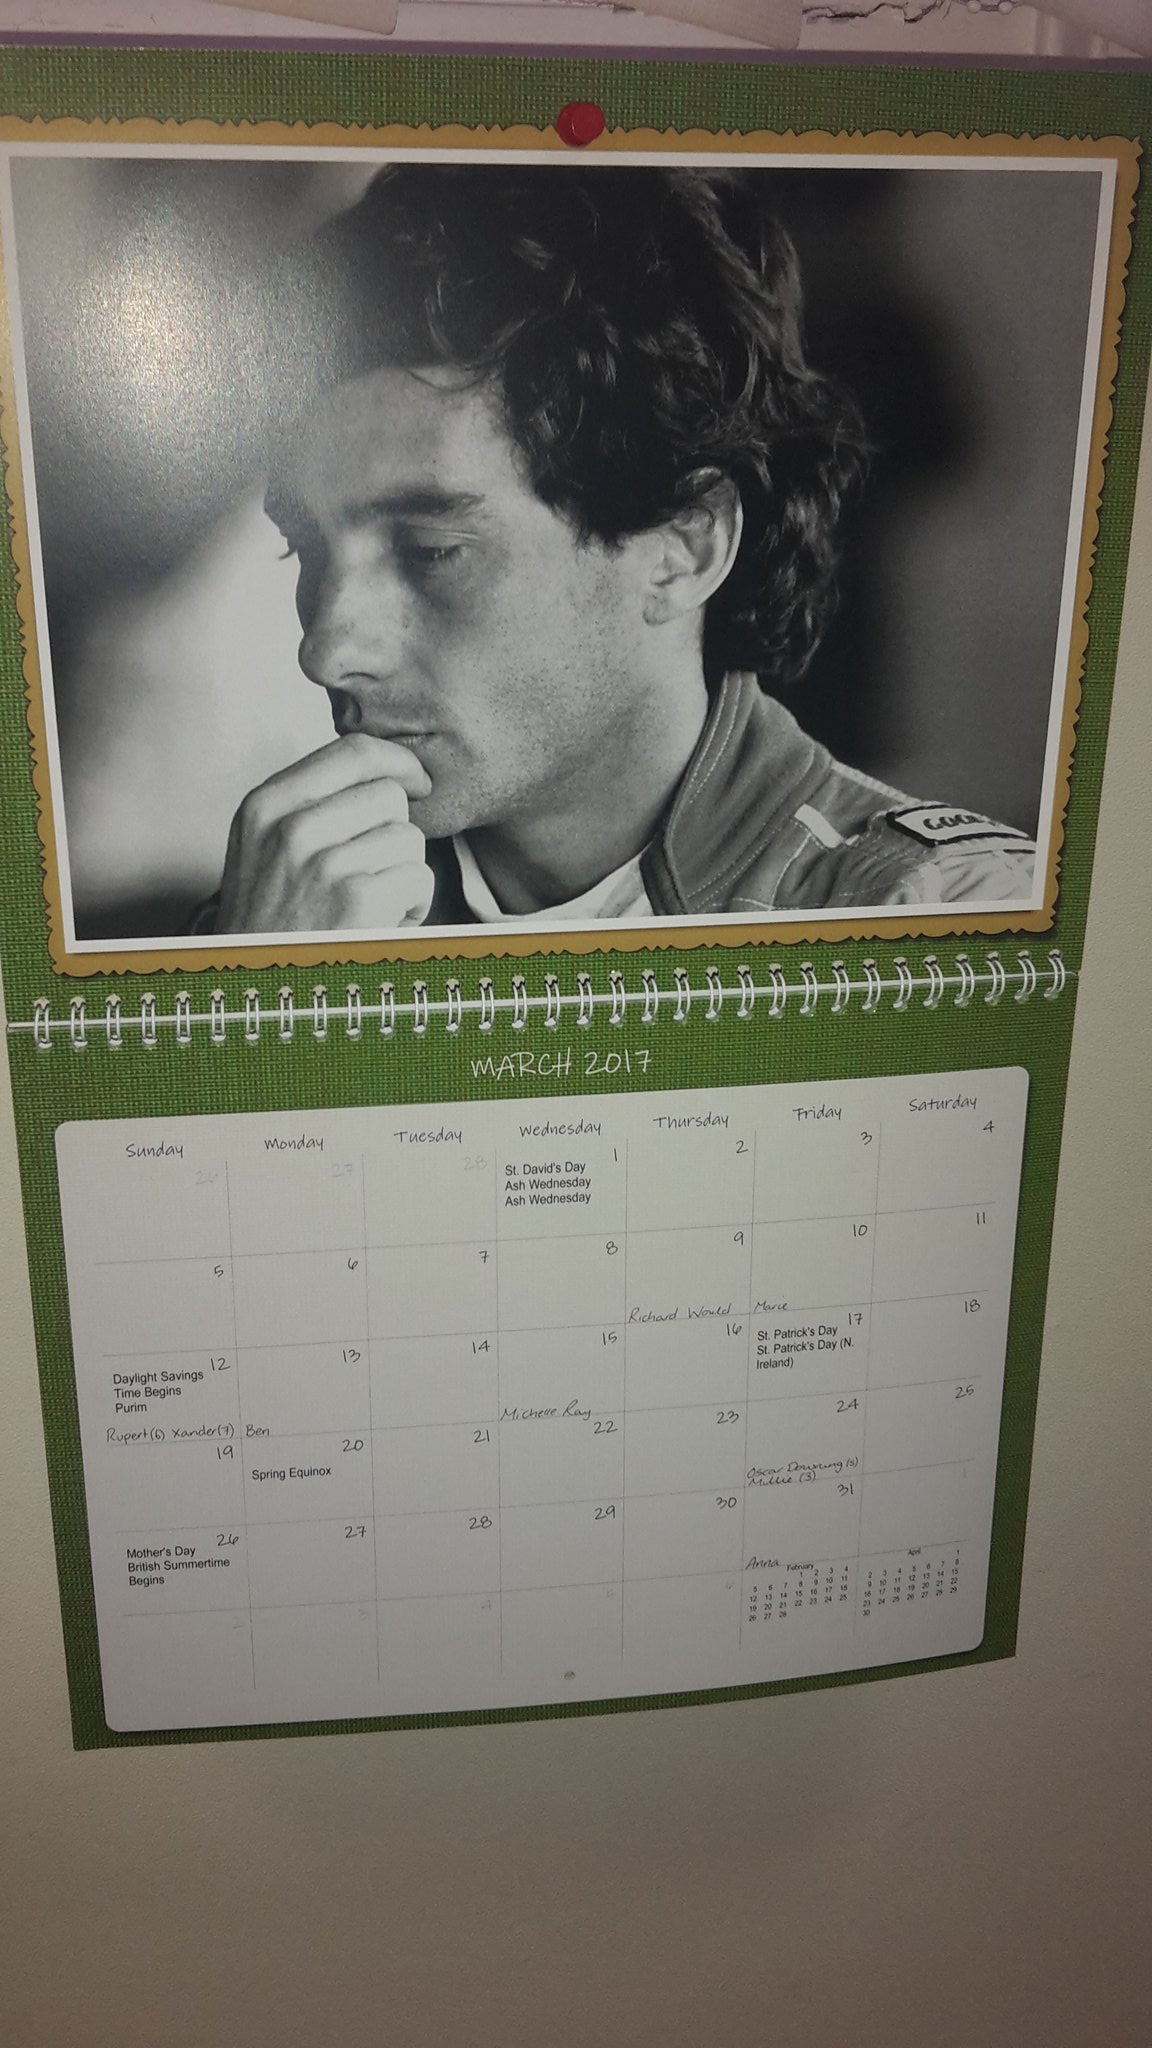  day 78

Back to work meant I got to see this again. 

Happy birthday Ayrton Senna. 